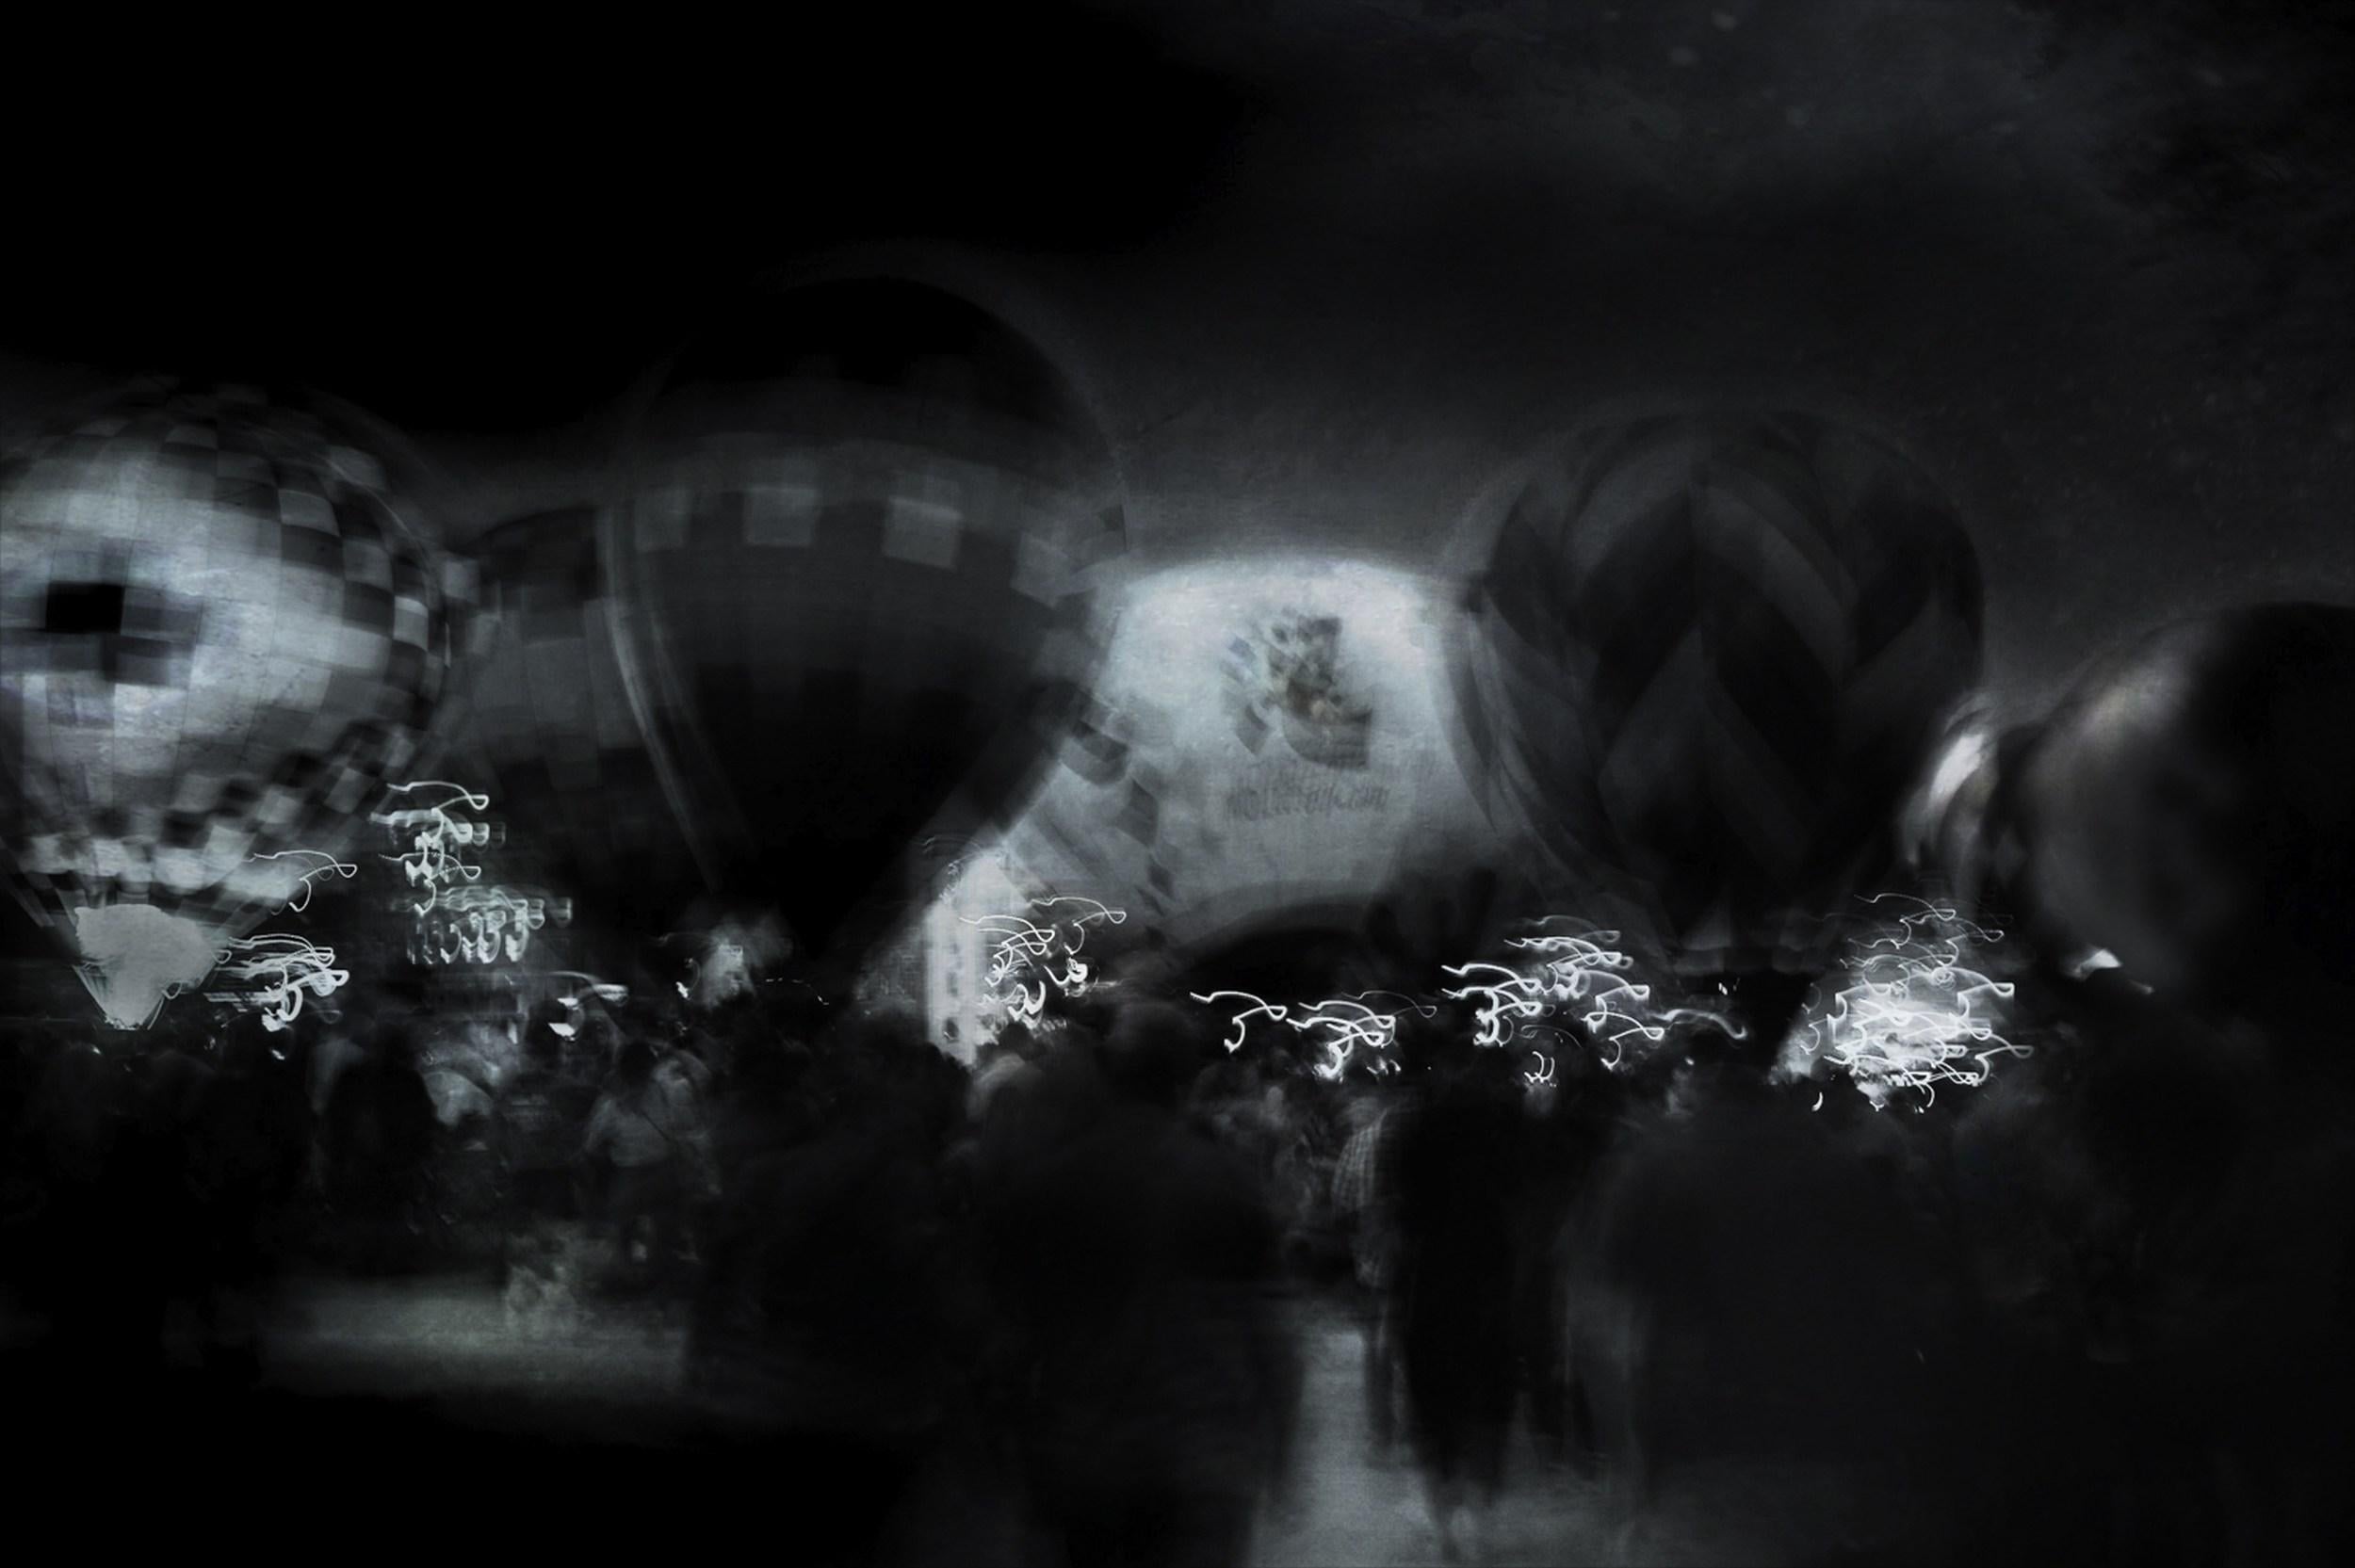 Jeffrey Tamblyn Abstract Photograph - Promenade BNW (black and white, hot air balloon, surreal landscape, motion blur)